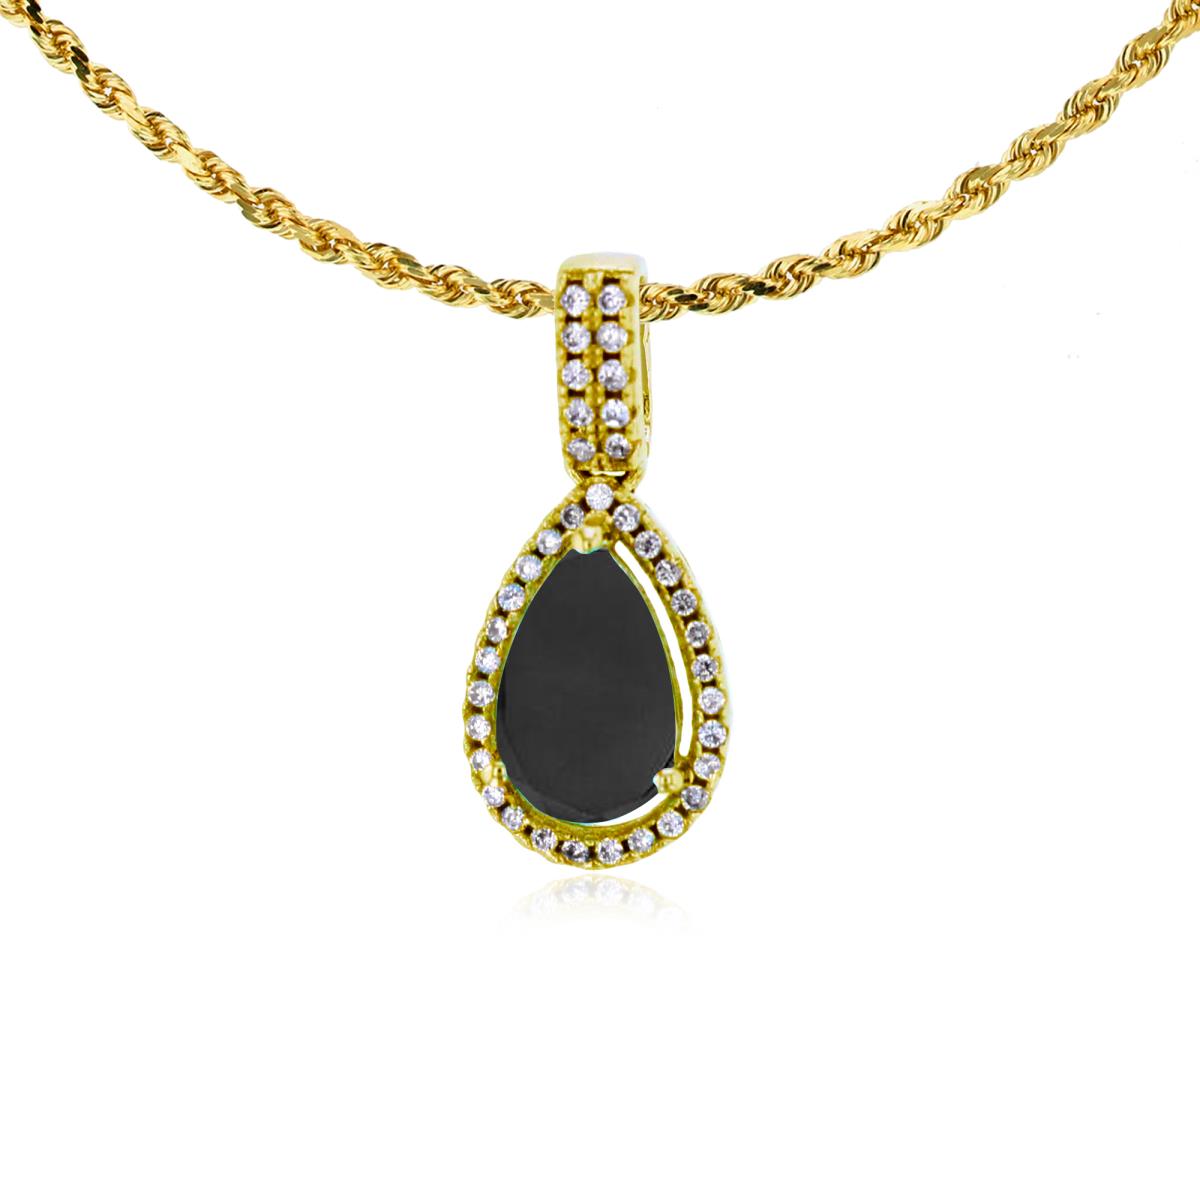 10K Yellow Gold 8x5mm Pear Cut Onyx & 0.11 CTTW Diamond Halo 18" Rope Chain Necklace